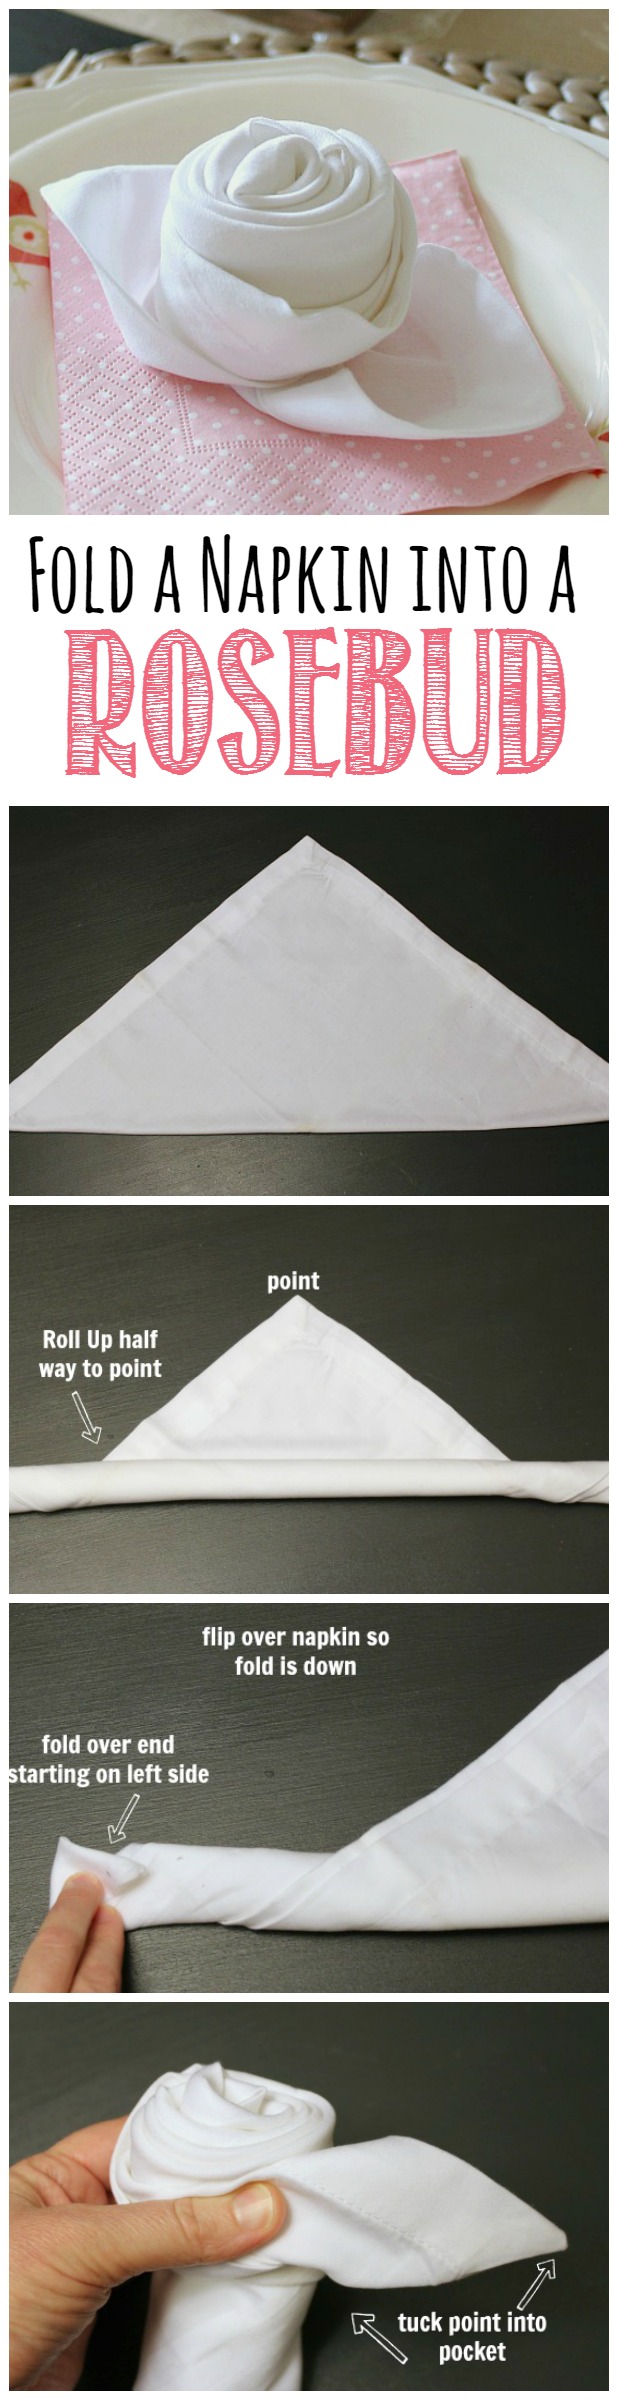 Simple tutorial to fold a rosebud napkin - only takes a minute and adds a special touch to your spring tablescape!